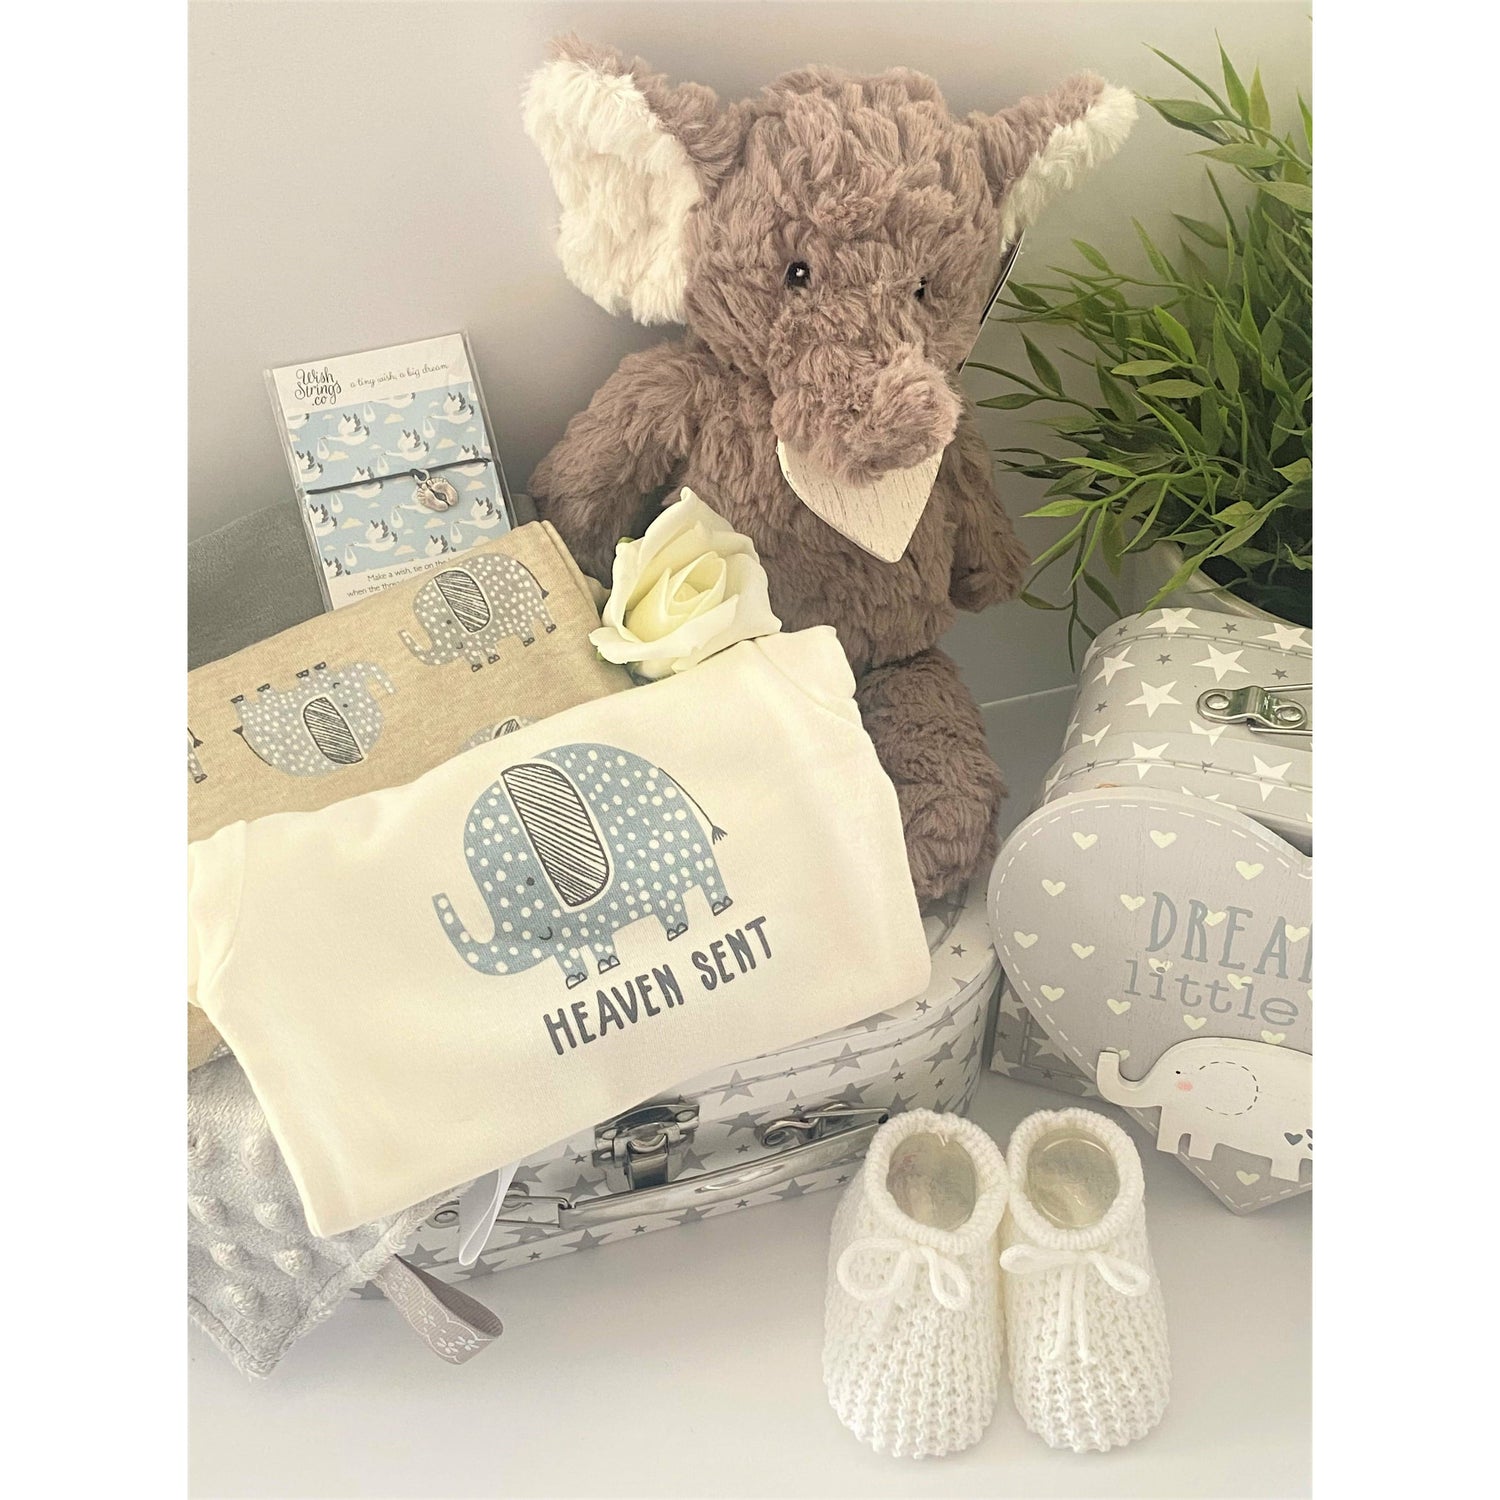 A unisex baby gift hamper in a white and grey stars baby keepsake case containing a Mary Meyer Nursery Putty elephant soft baby toy, a set of 3 coton baby bodysuits with elephant prints and one which reads "Heaven sent", a pair of white baby bootees, a wish braclet for Mum, a heray shaped nursery plaque in grey and white which reads "Dream big little one and has a wooden elephant motif and a grey Taggie blanket.